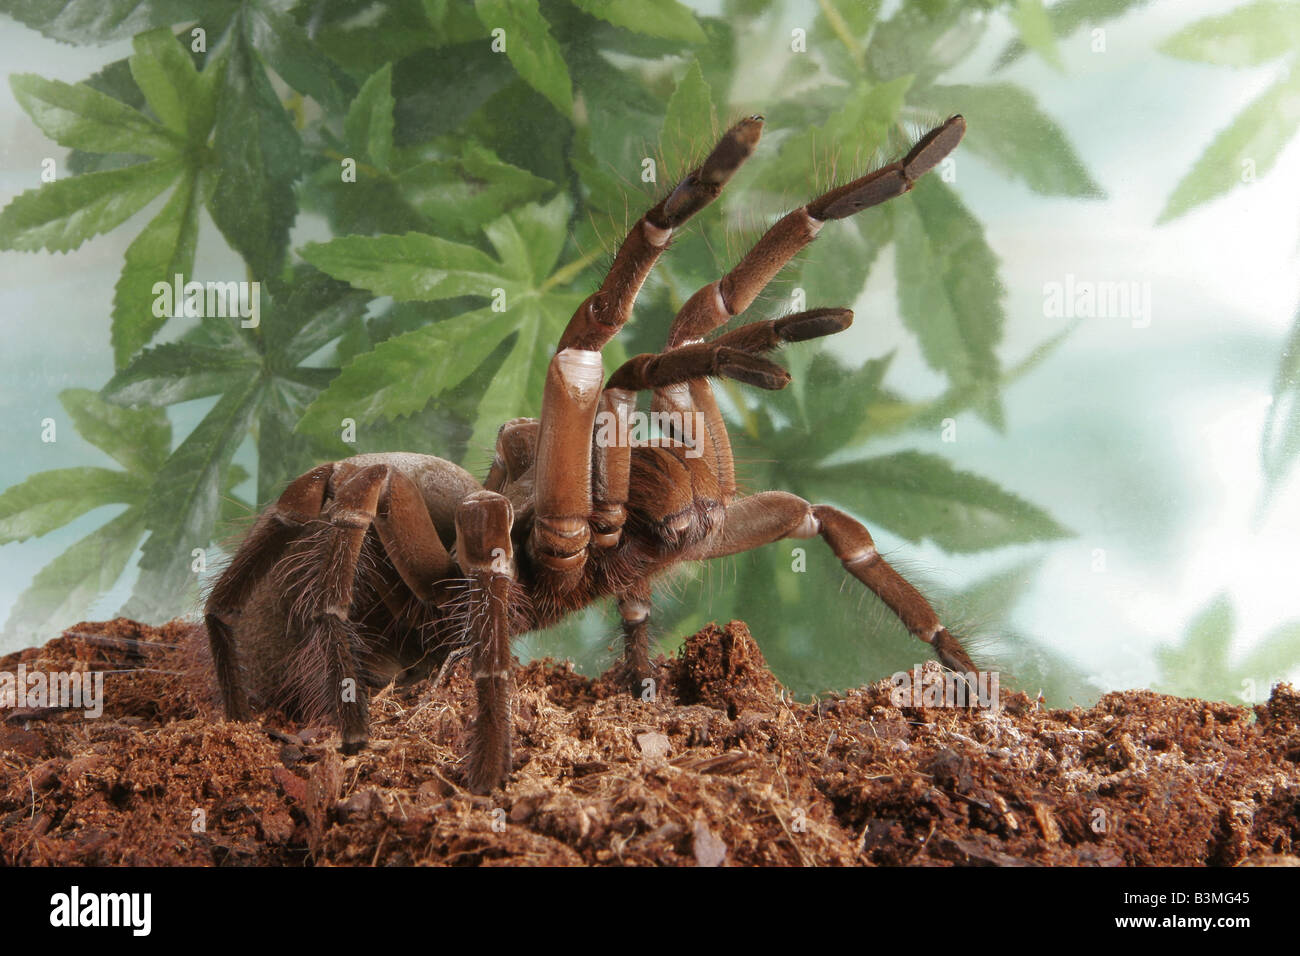 Goliath Birdeater (Theraphosa blondi), the largest spider in the world Stock Photo